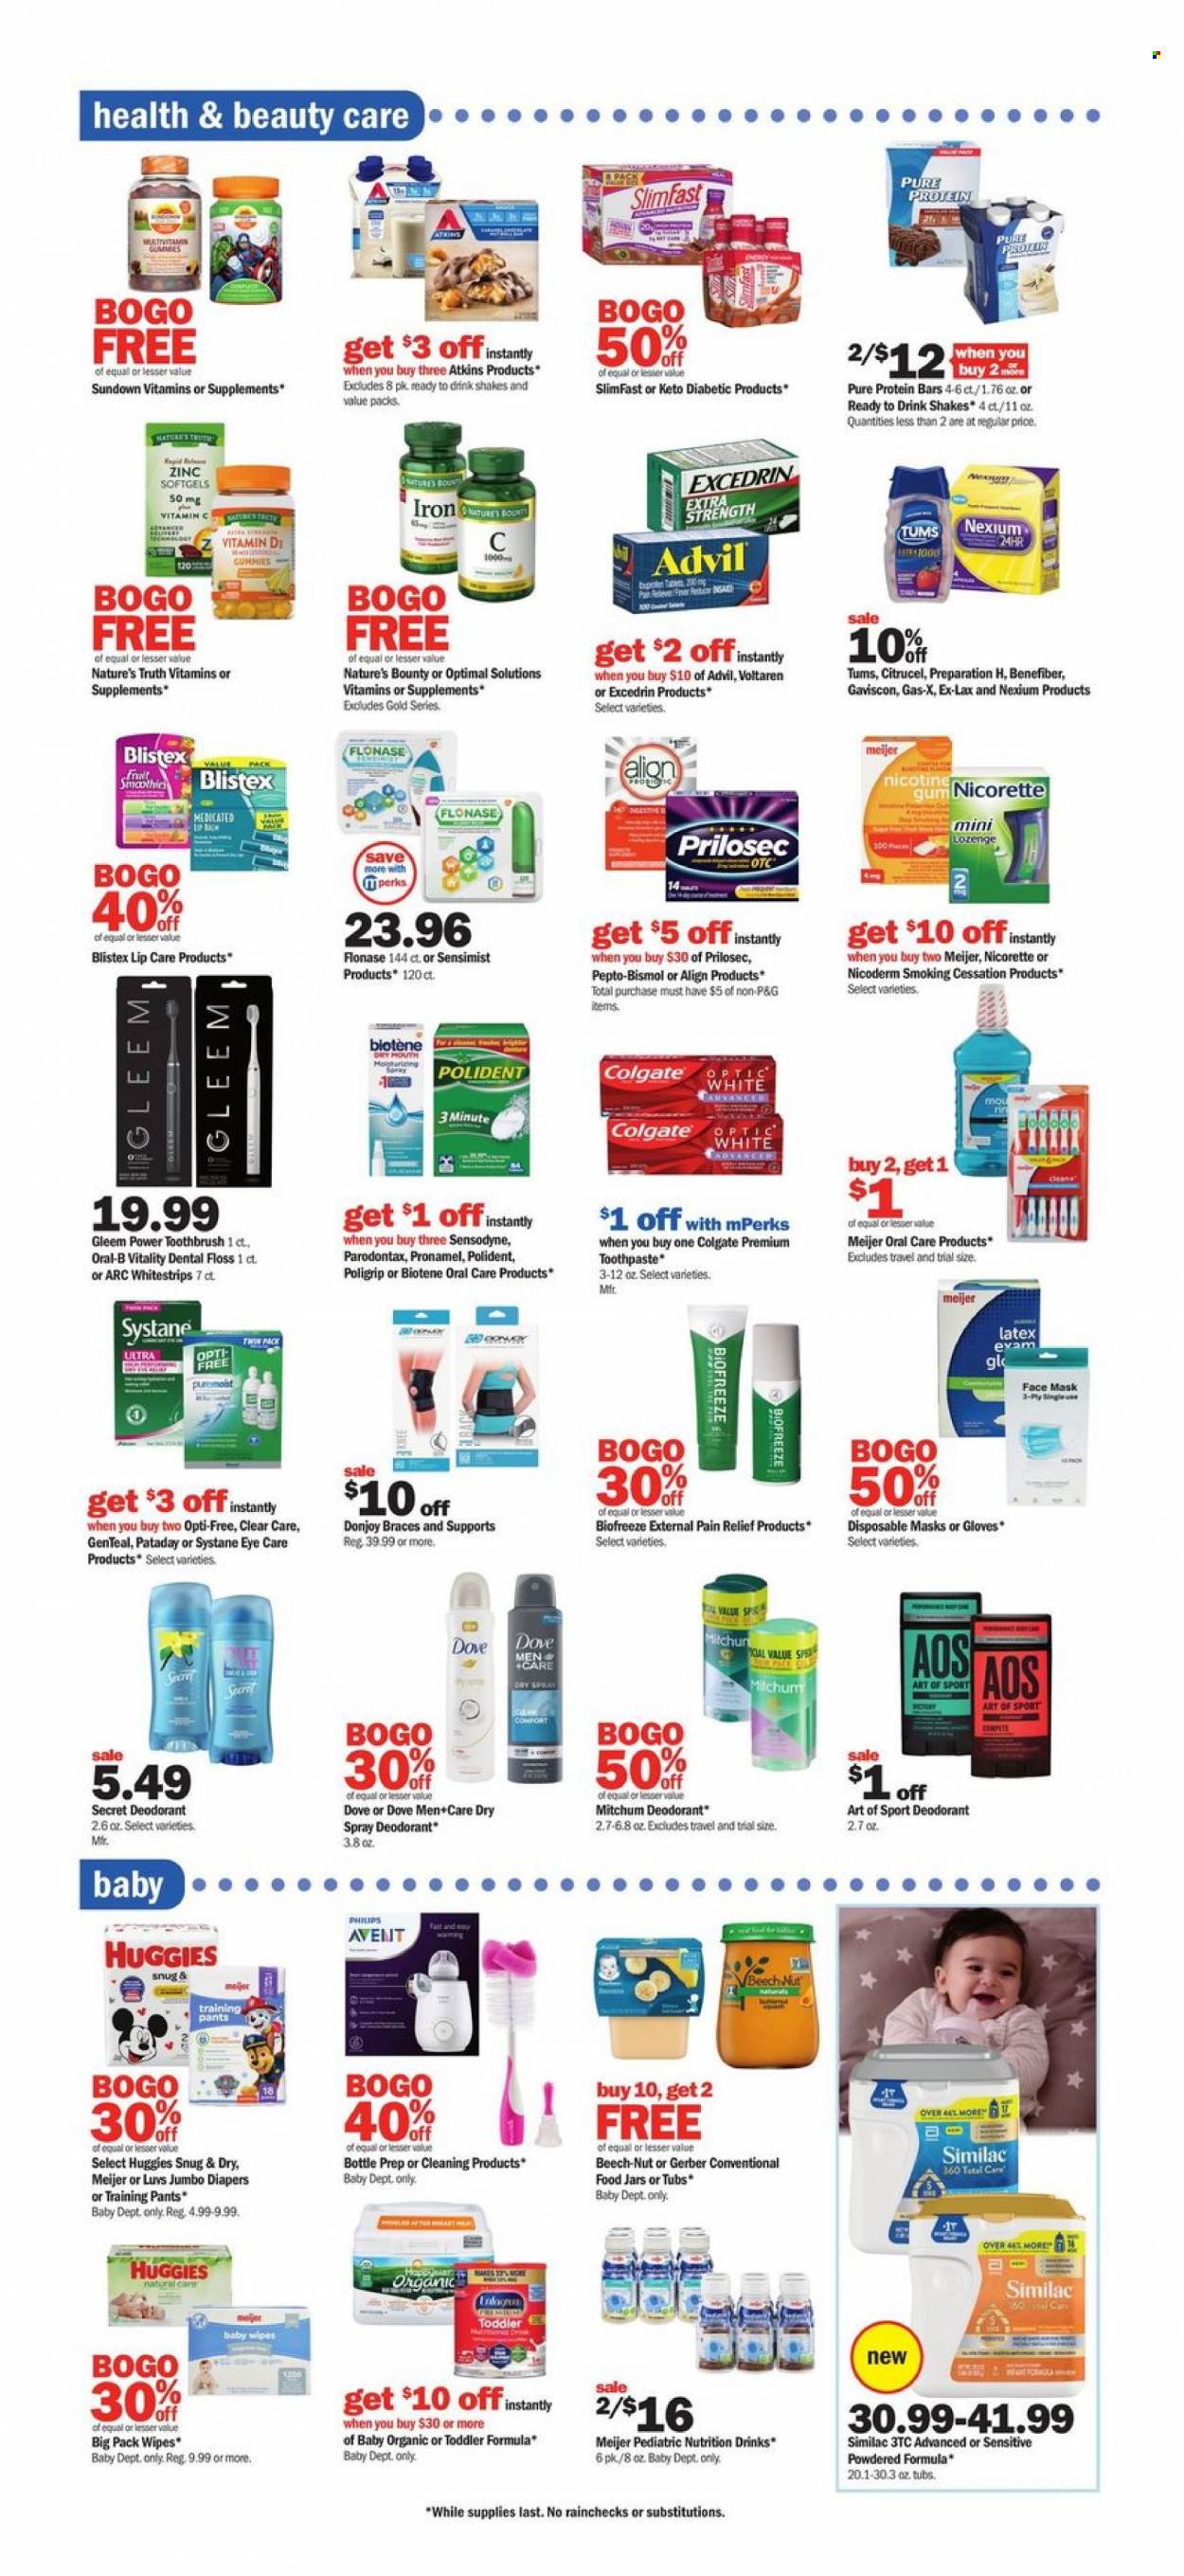 thumbnail - Meijer Flyer - 01/23/2022 - 01/29/2022 - Sales products - Slimfast, shake, Gerber, protein bar, Similac, wipes, Huggies, pants, baby wipes, nappies, baby pants, Rin, Dove, Biotene, Colgate, toothbrush, Oral-B, toothpaste, Sensodyne, Polident, face mask, anti-perspirant, deodorant, jar, Philips, gloves, Snug, Clear Care, Excedrin, Nature's Bounty, Nature's Truth, NicoDerm, Nicorette, nicotine therapy, Systane, vitamin c, pain relief, Pepto-bismol, Nexium, zinc, Advil Rapid, Gaviscon. Page 15.